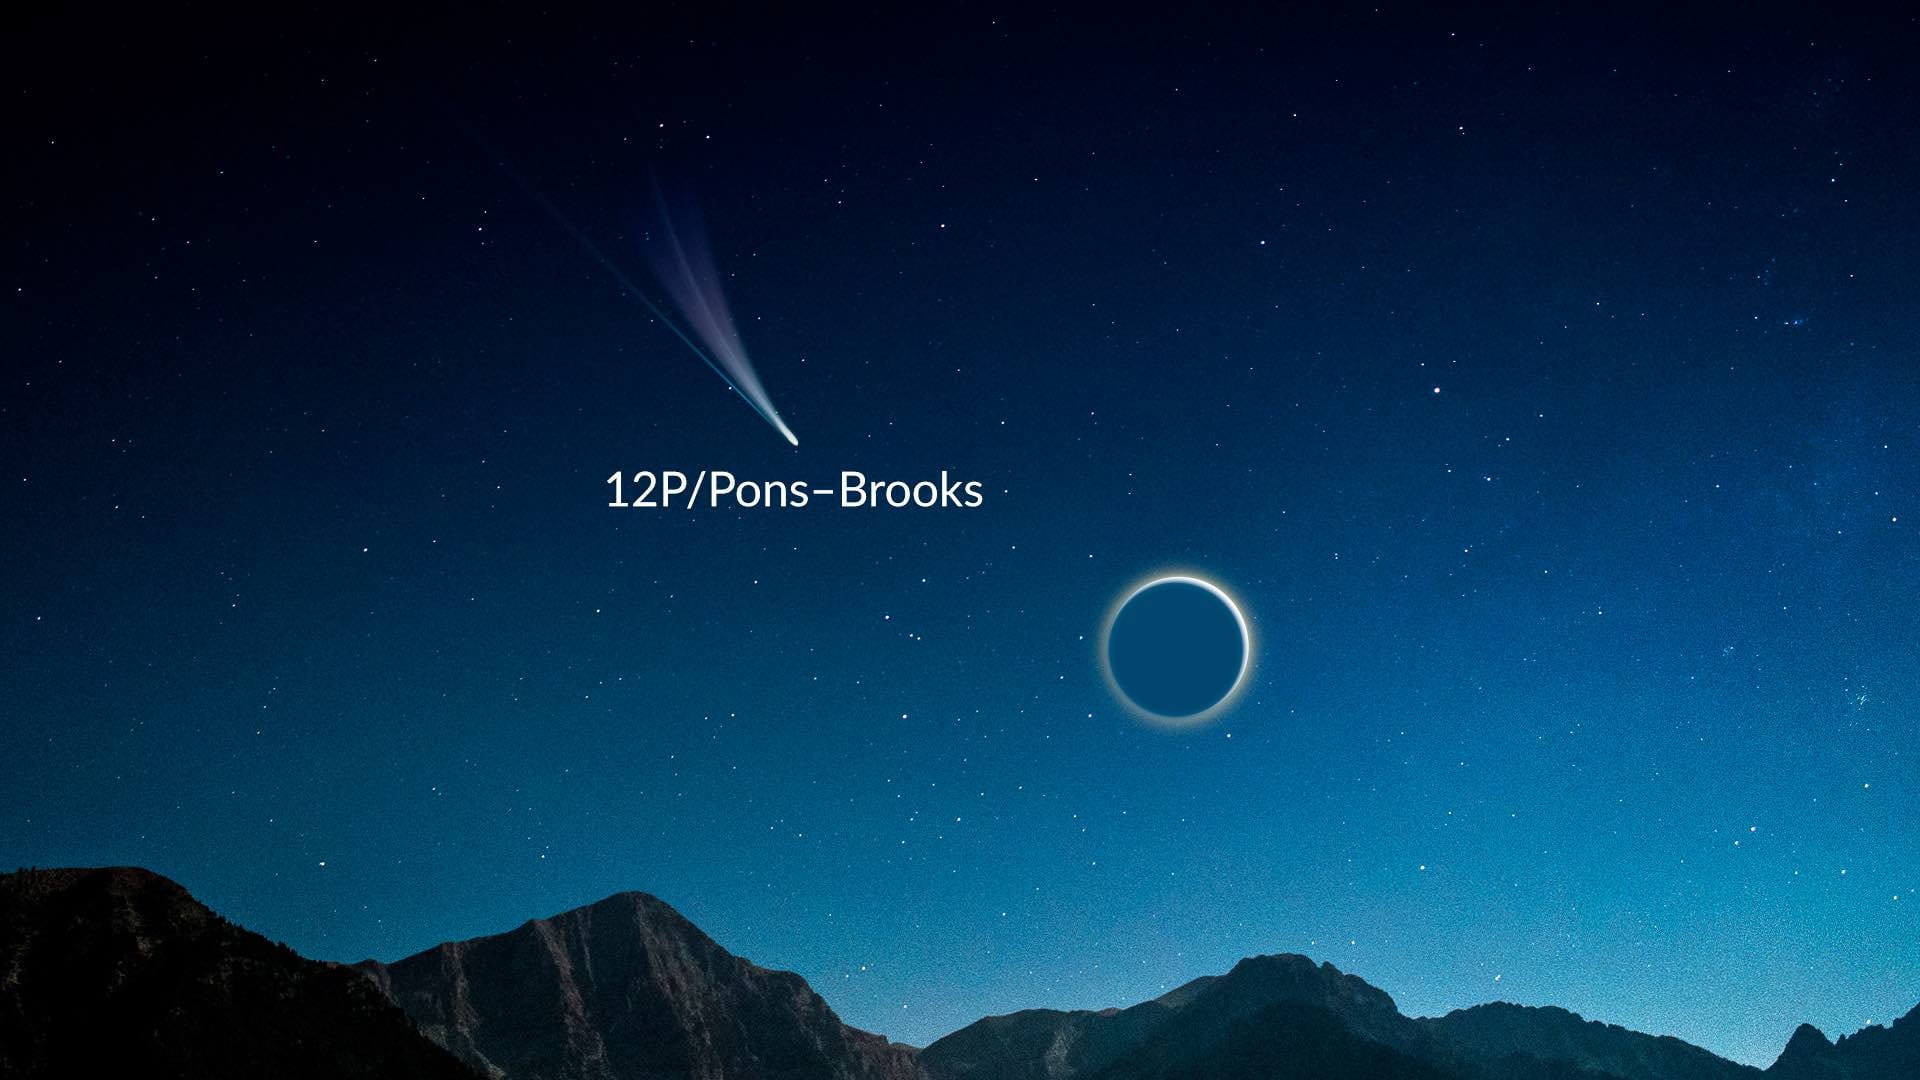 Comet Pons-Brooks at its brightest